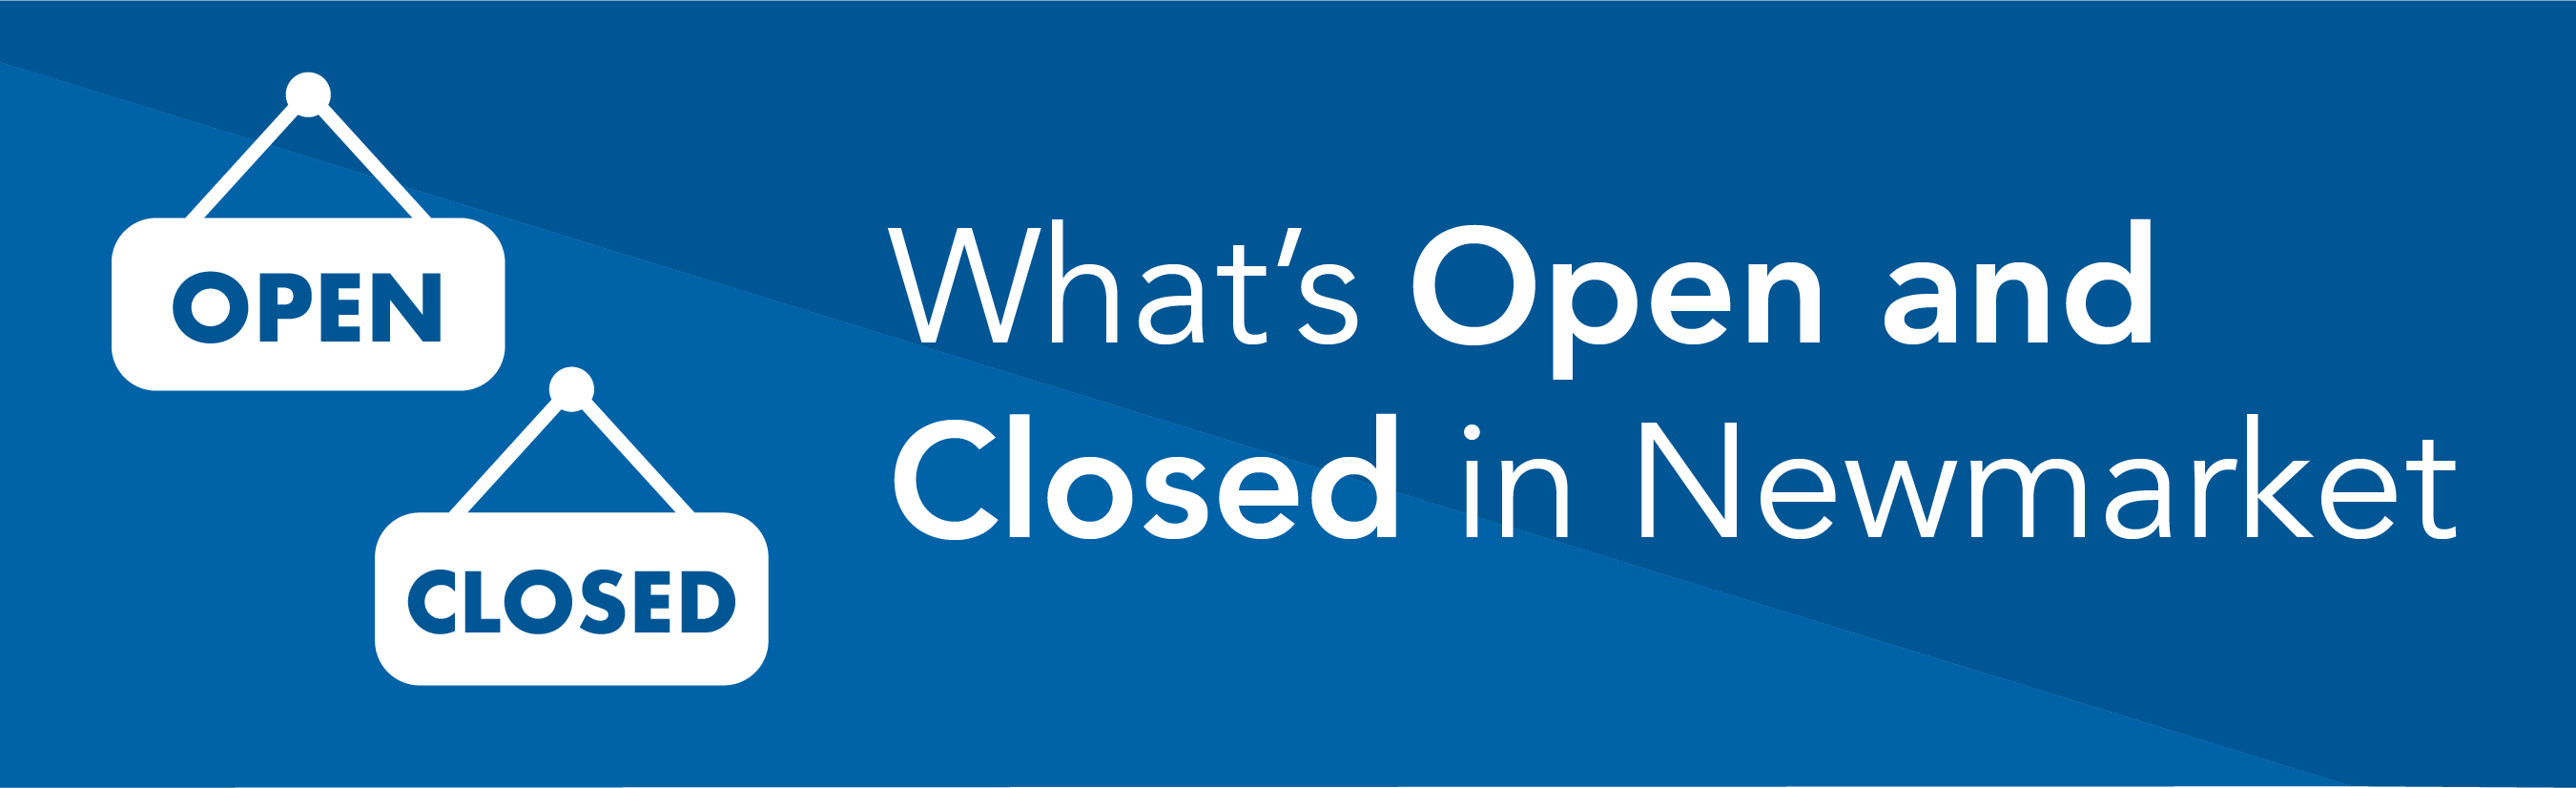 What's Open and Closed in Newmarket Web Banner